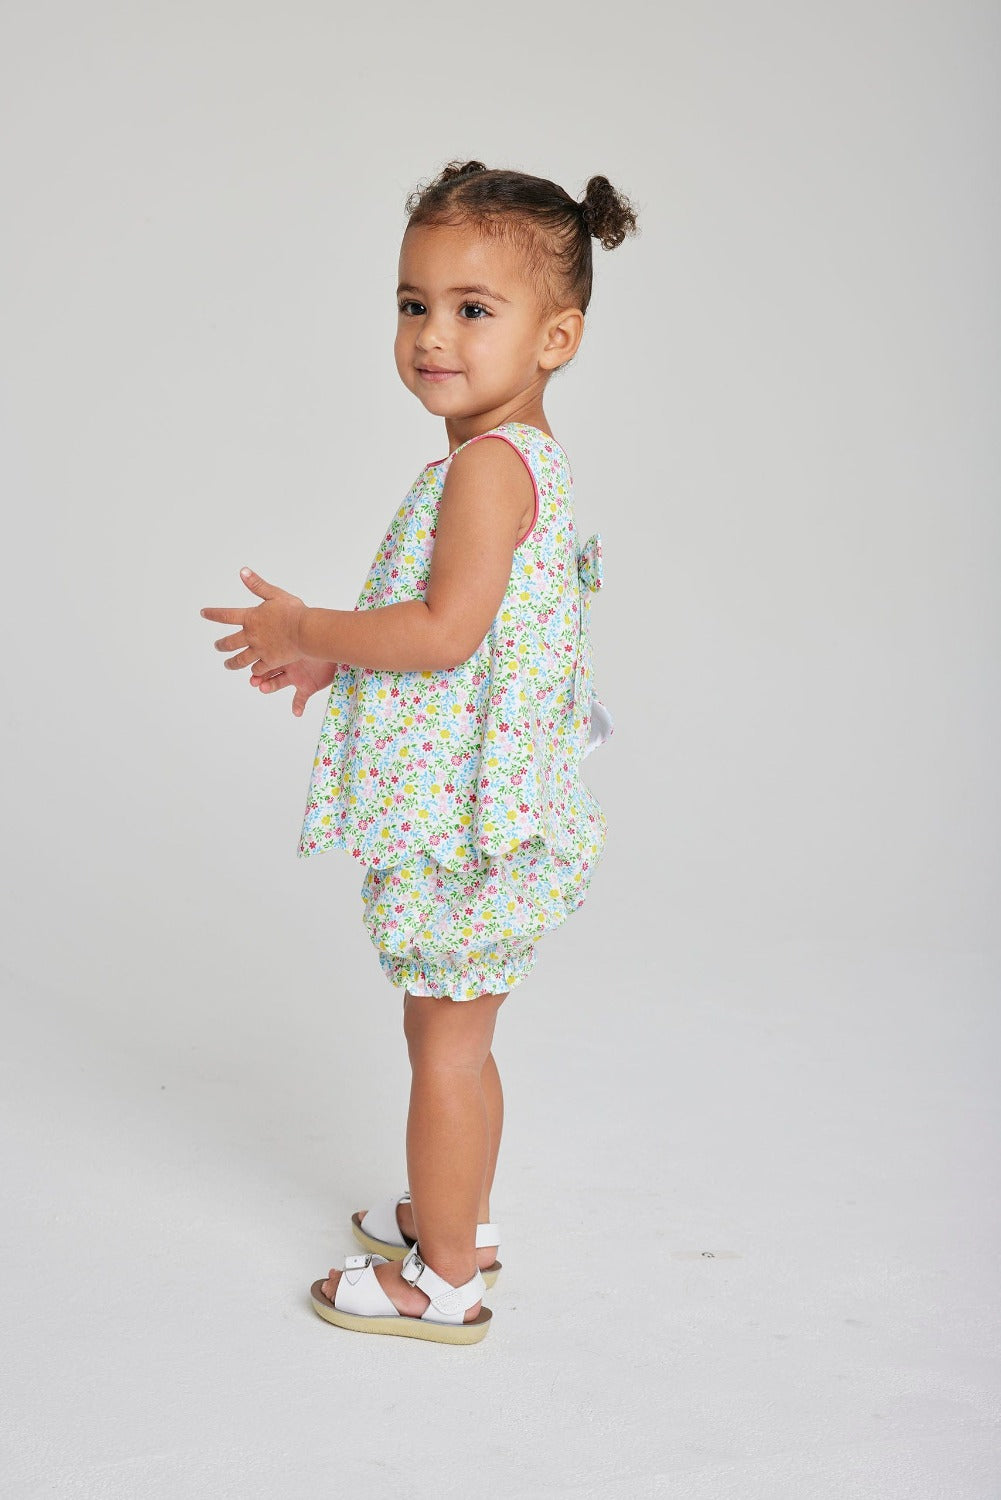 seguridadindustrialcr girl's floral bloomer set with scallop details and bow in back